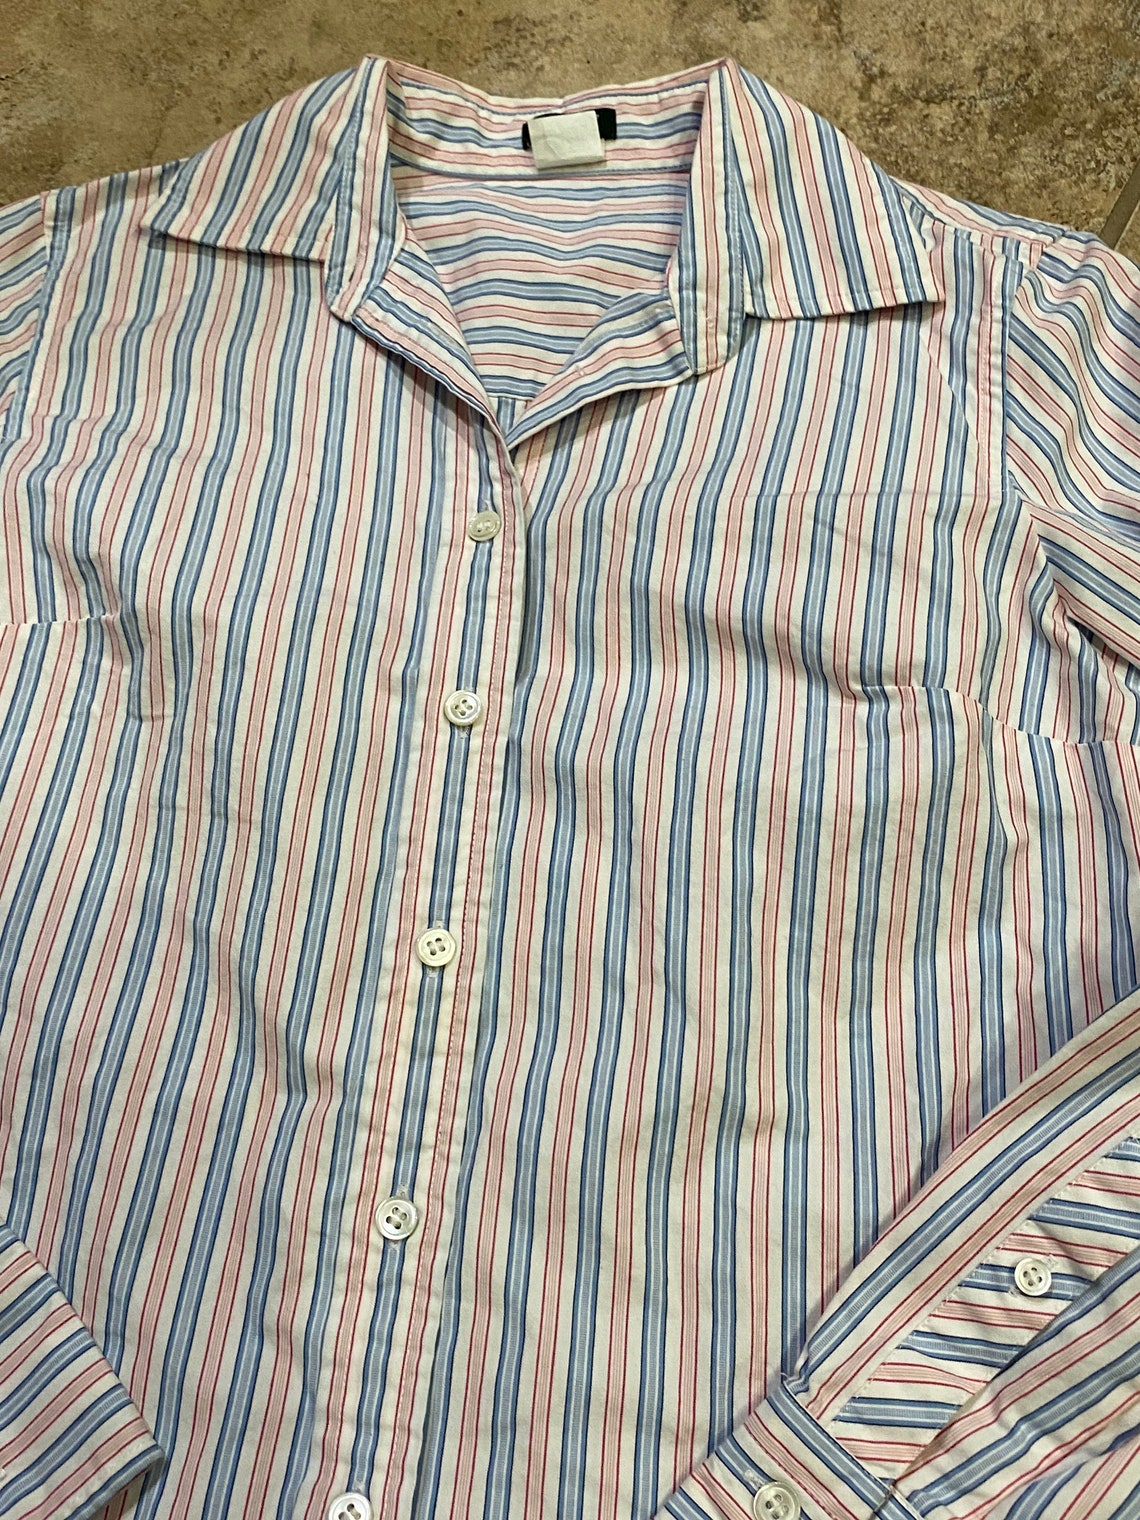 J. CREW Work Shirt RN 77388 Long Sleeve Button Up Striped | Etsy